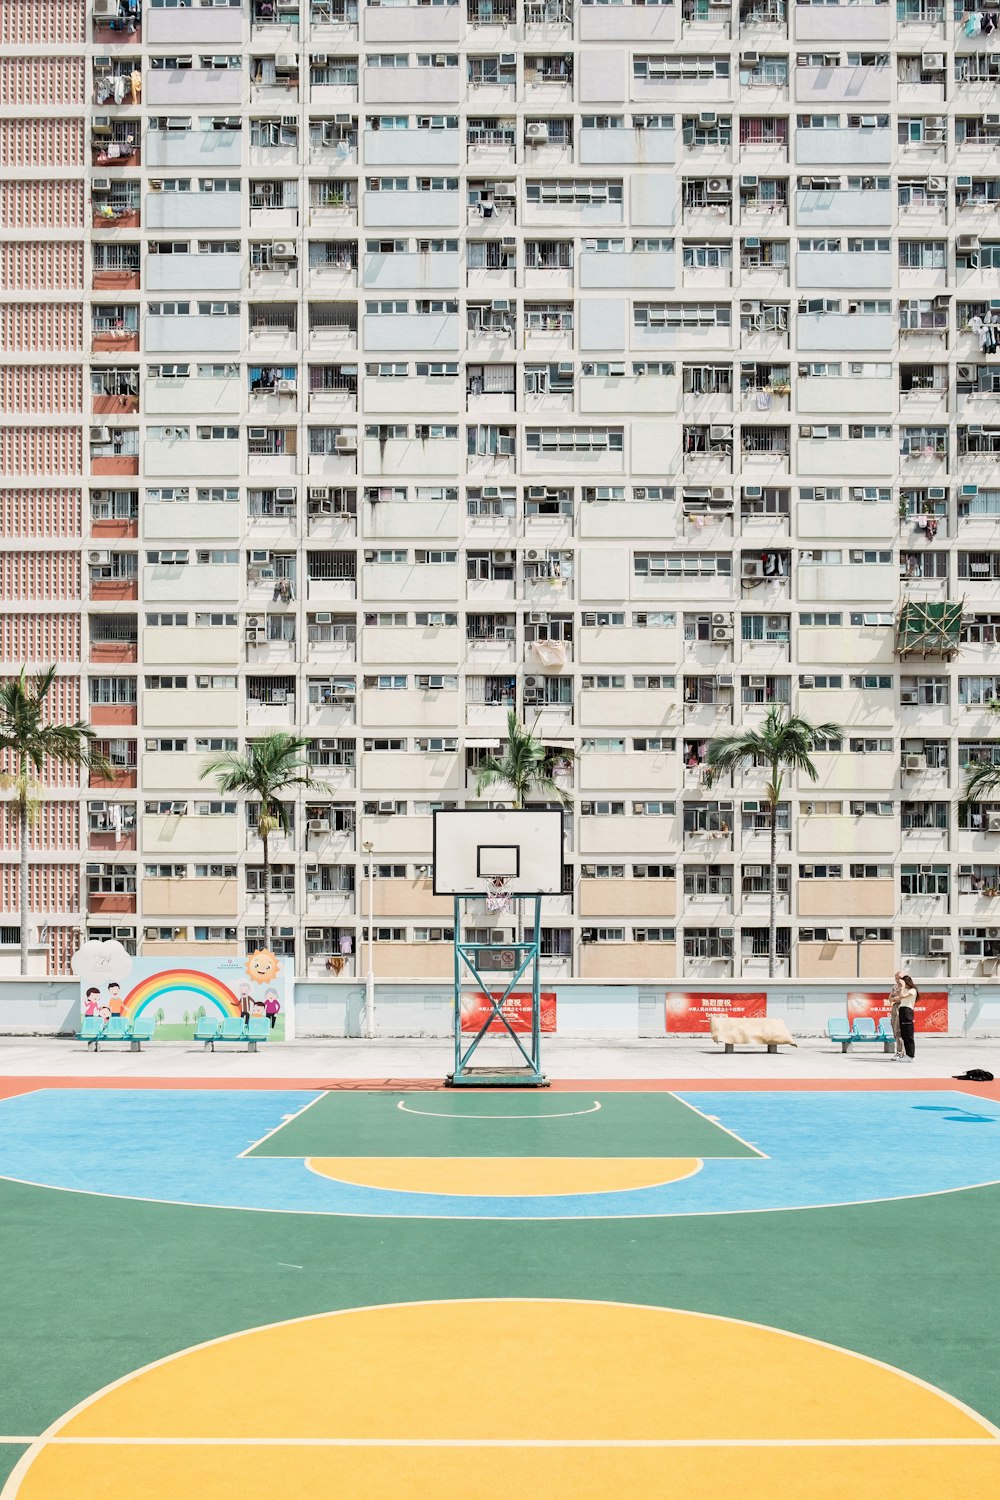 a basketball court in front of a large apartment building